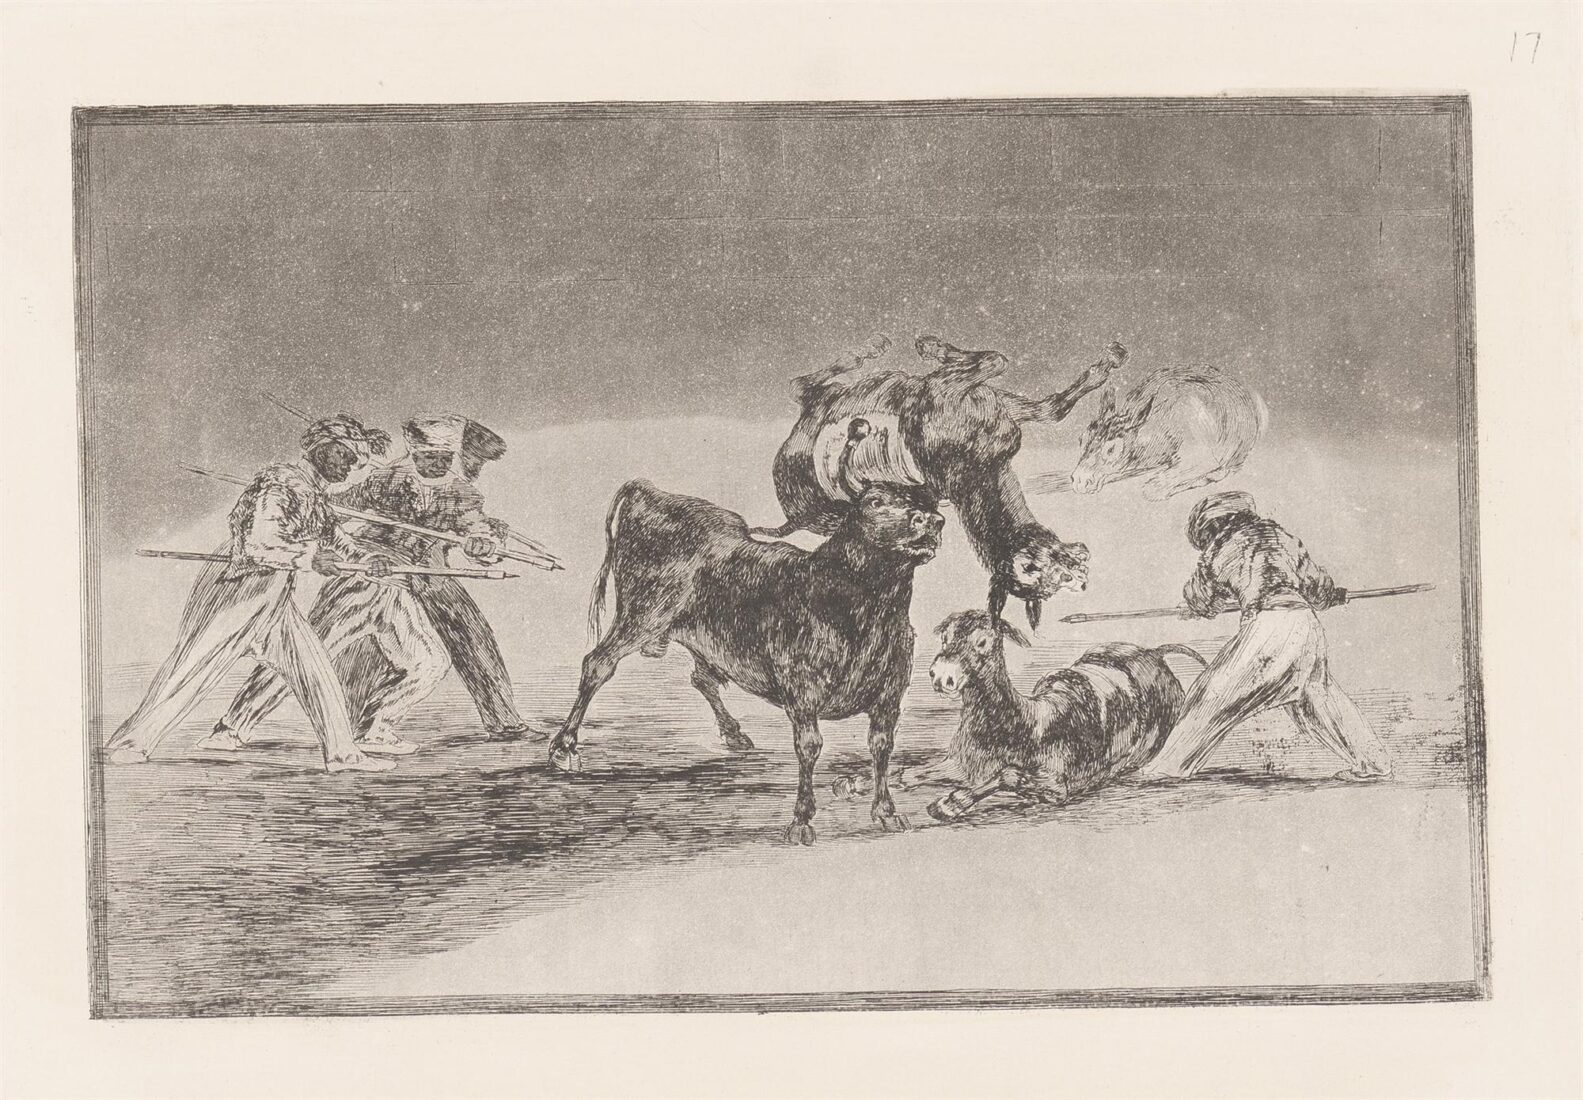 The Moors use donkeys as a barrier to defend themselves against the bull whose horns have been tipped with balls. (Palenque de los moros hecho con burros para defenderse del toro embolado) - Goya y Lucientes Francisco